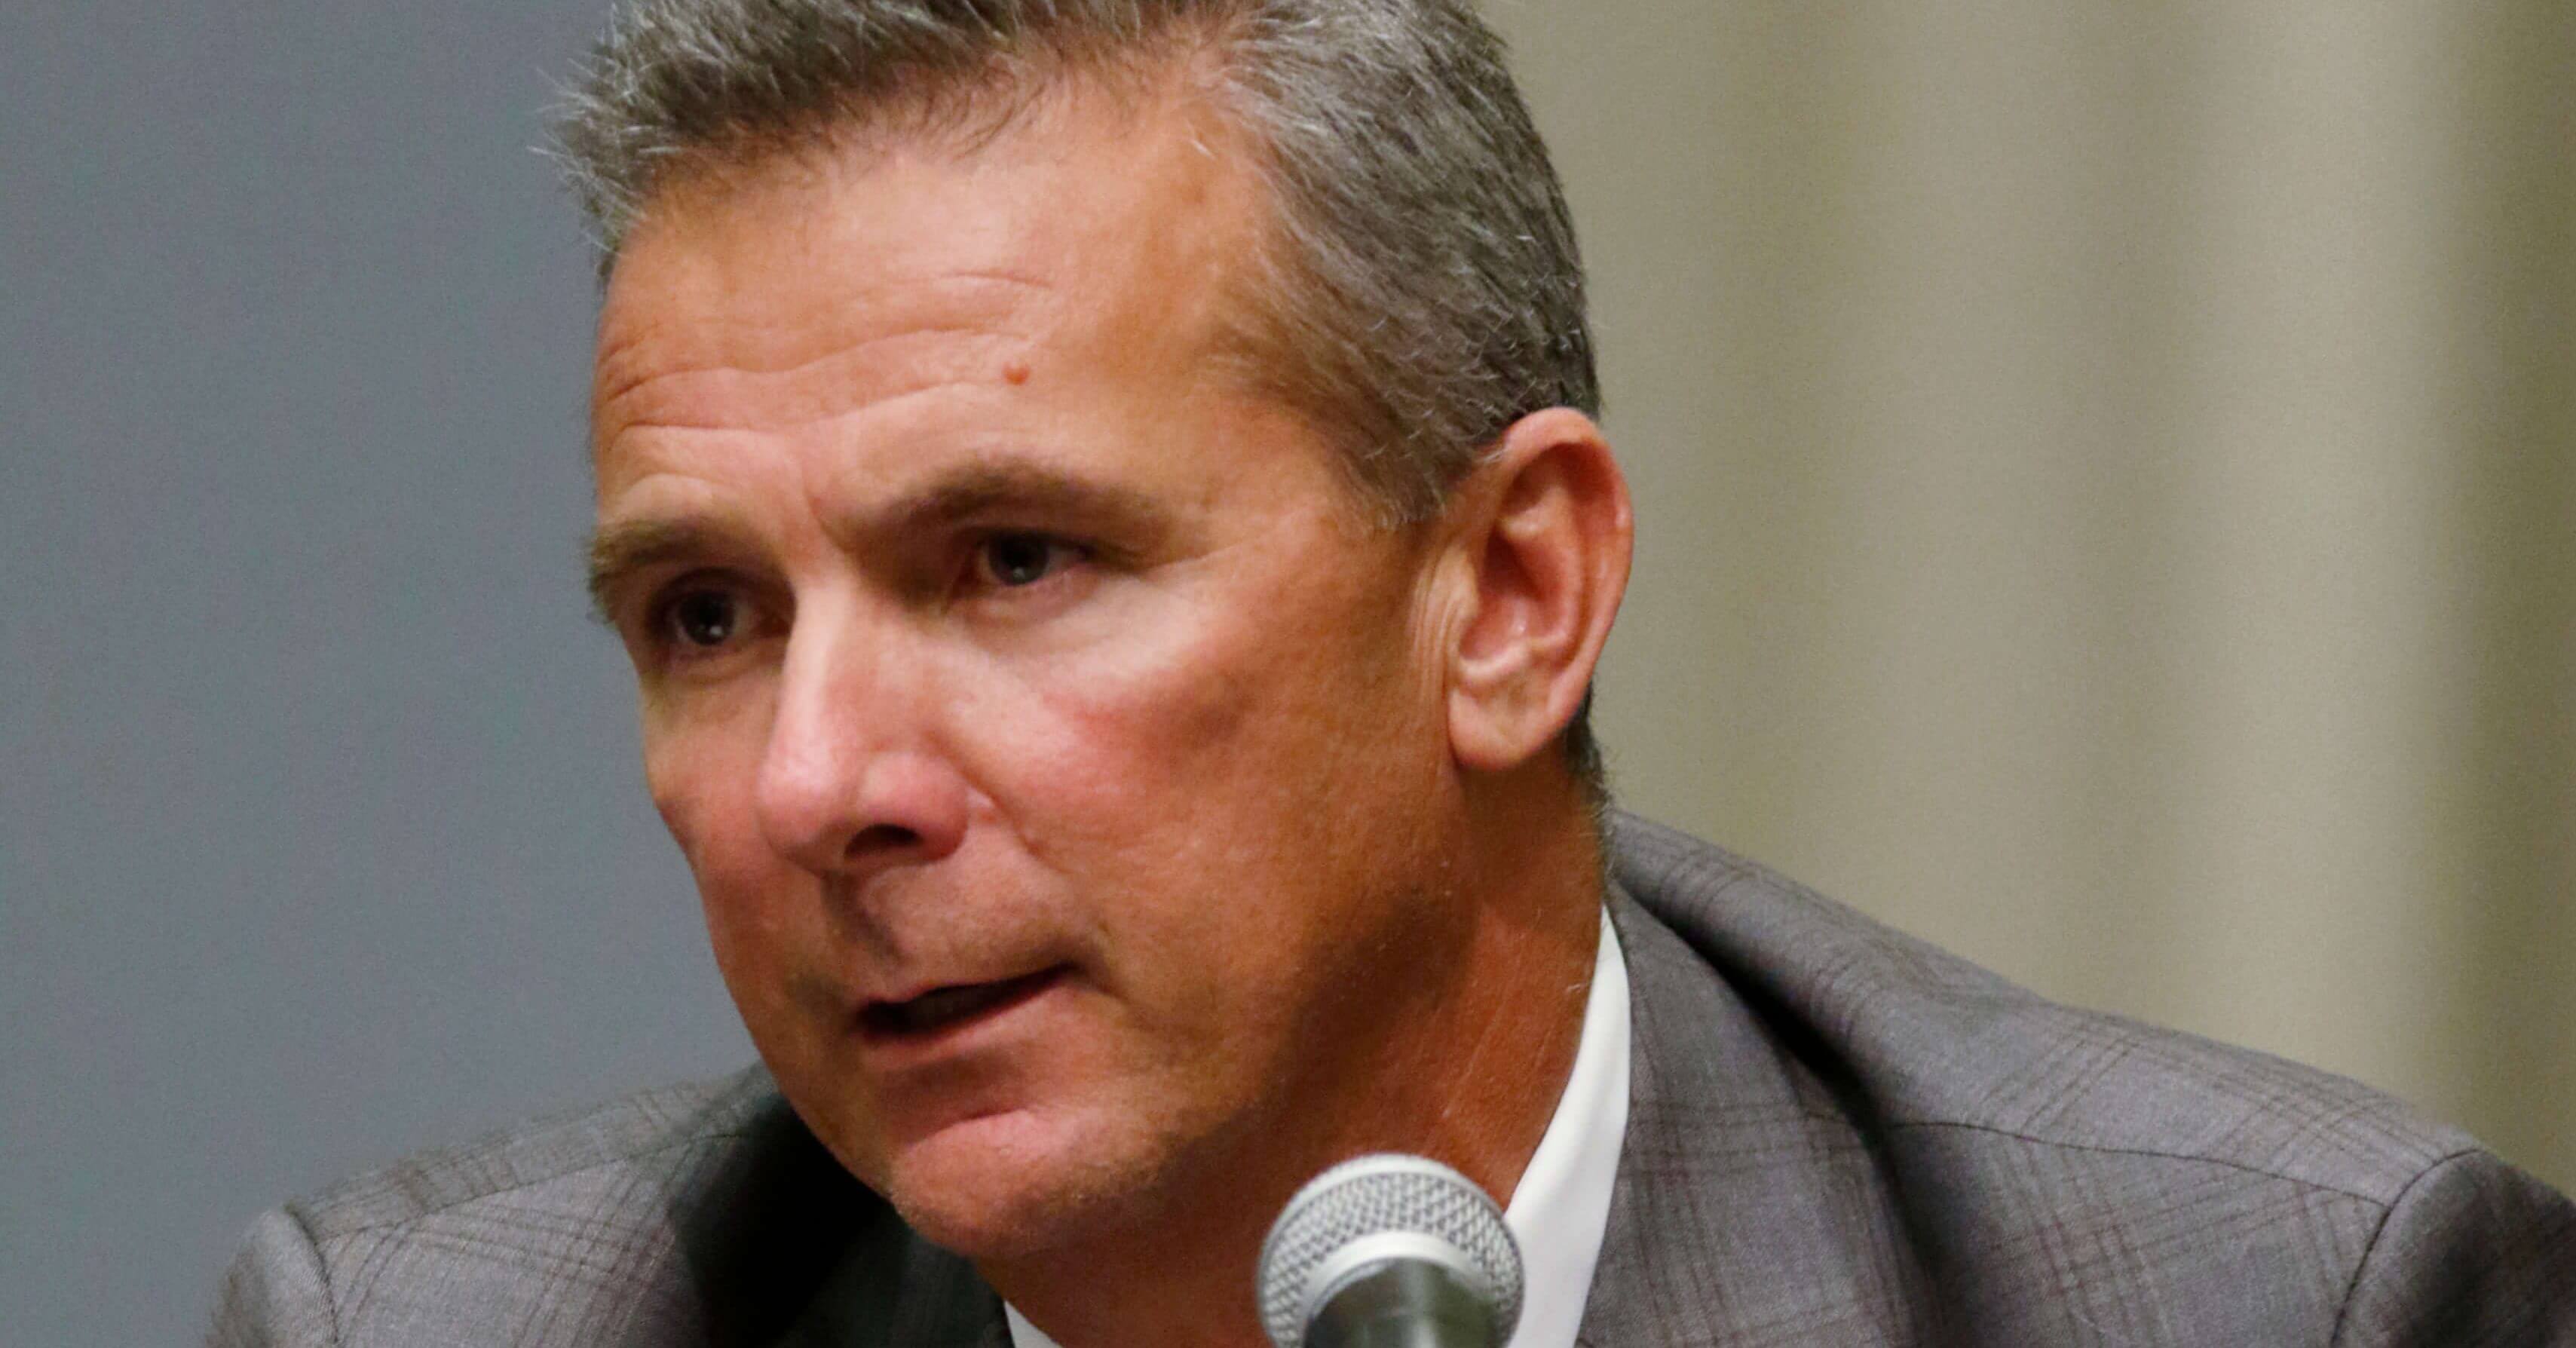 Ohio State football coach Urban Meyer answers questions during a news conference in Columbus, Ohio on Wednesday.